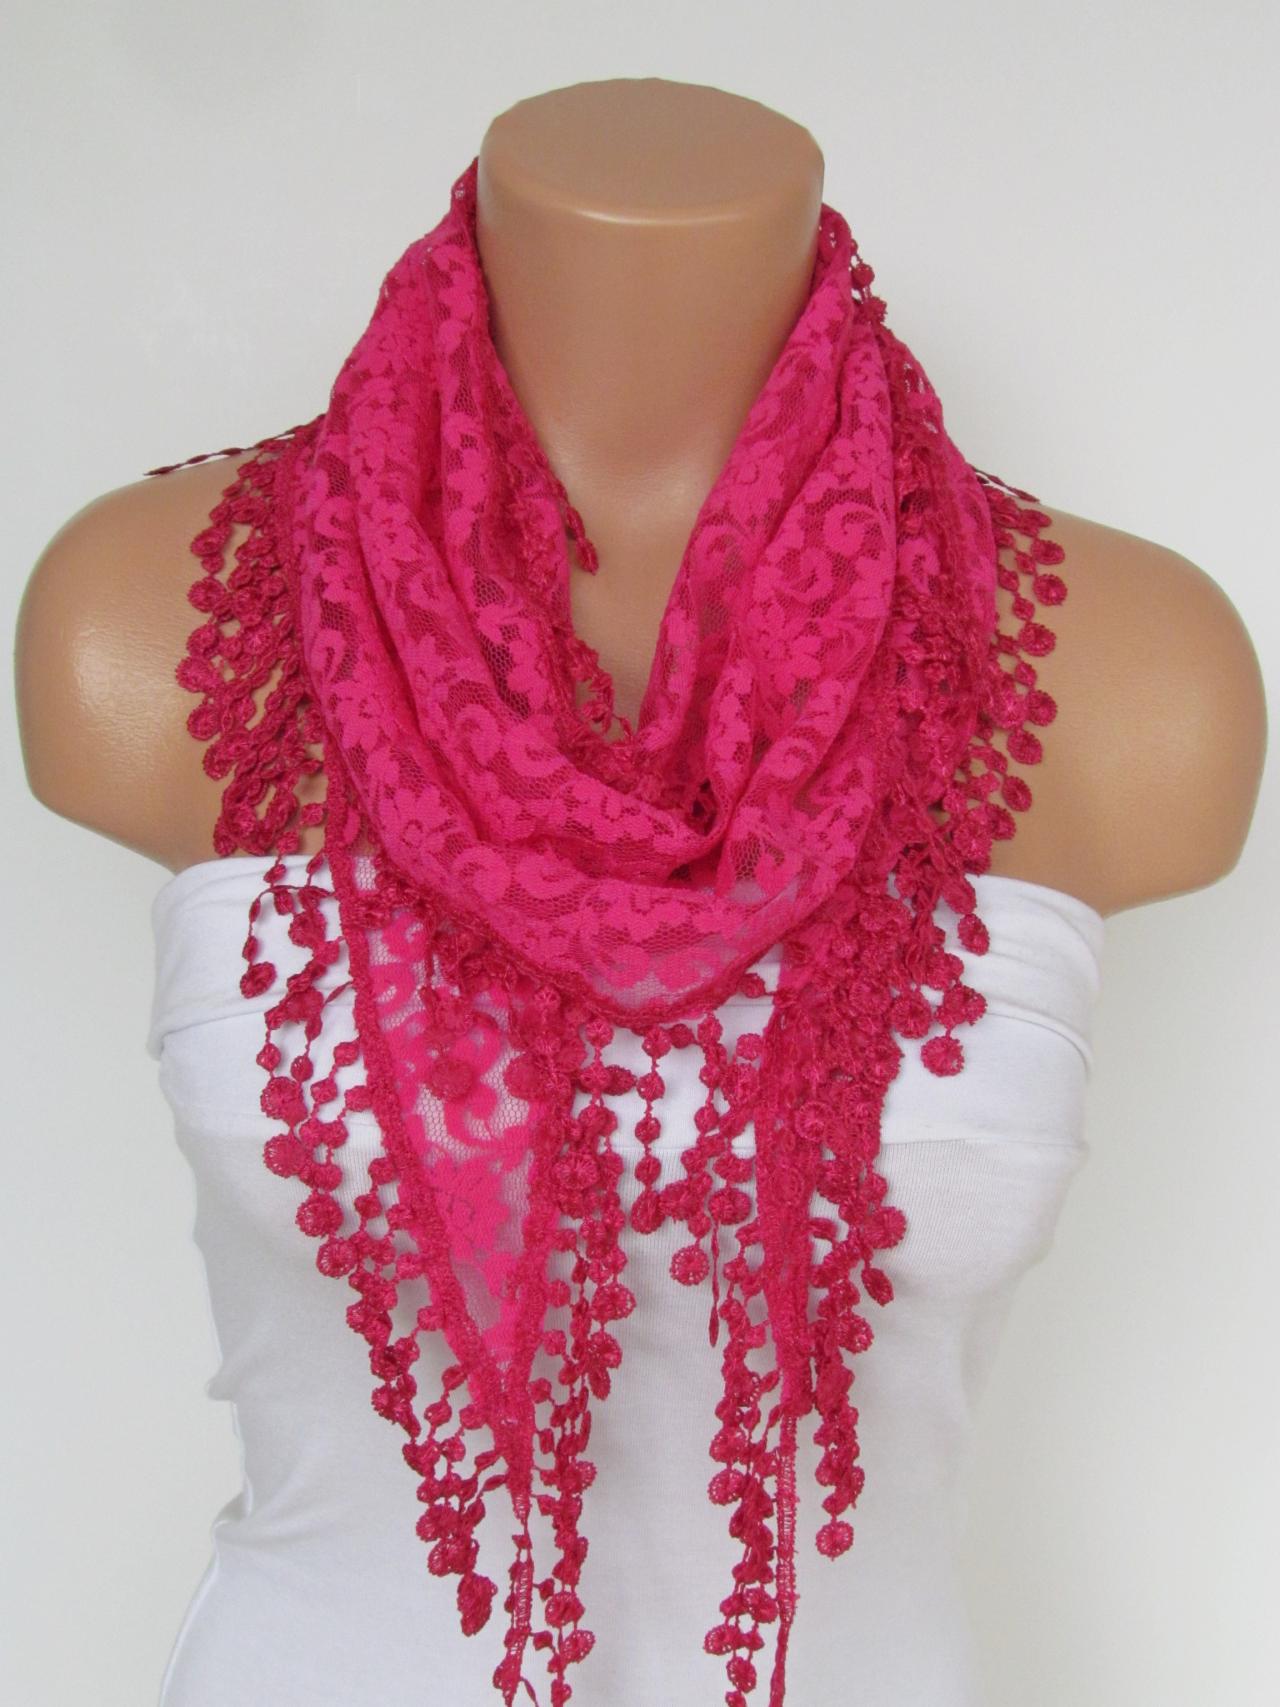 Deep Pink Long Scarf With Fringe-Winter Fashion Scarf-Headband-Necklace- Infinity Scarf- Winter Accessory-Long Scarf